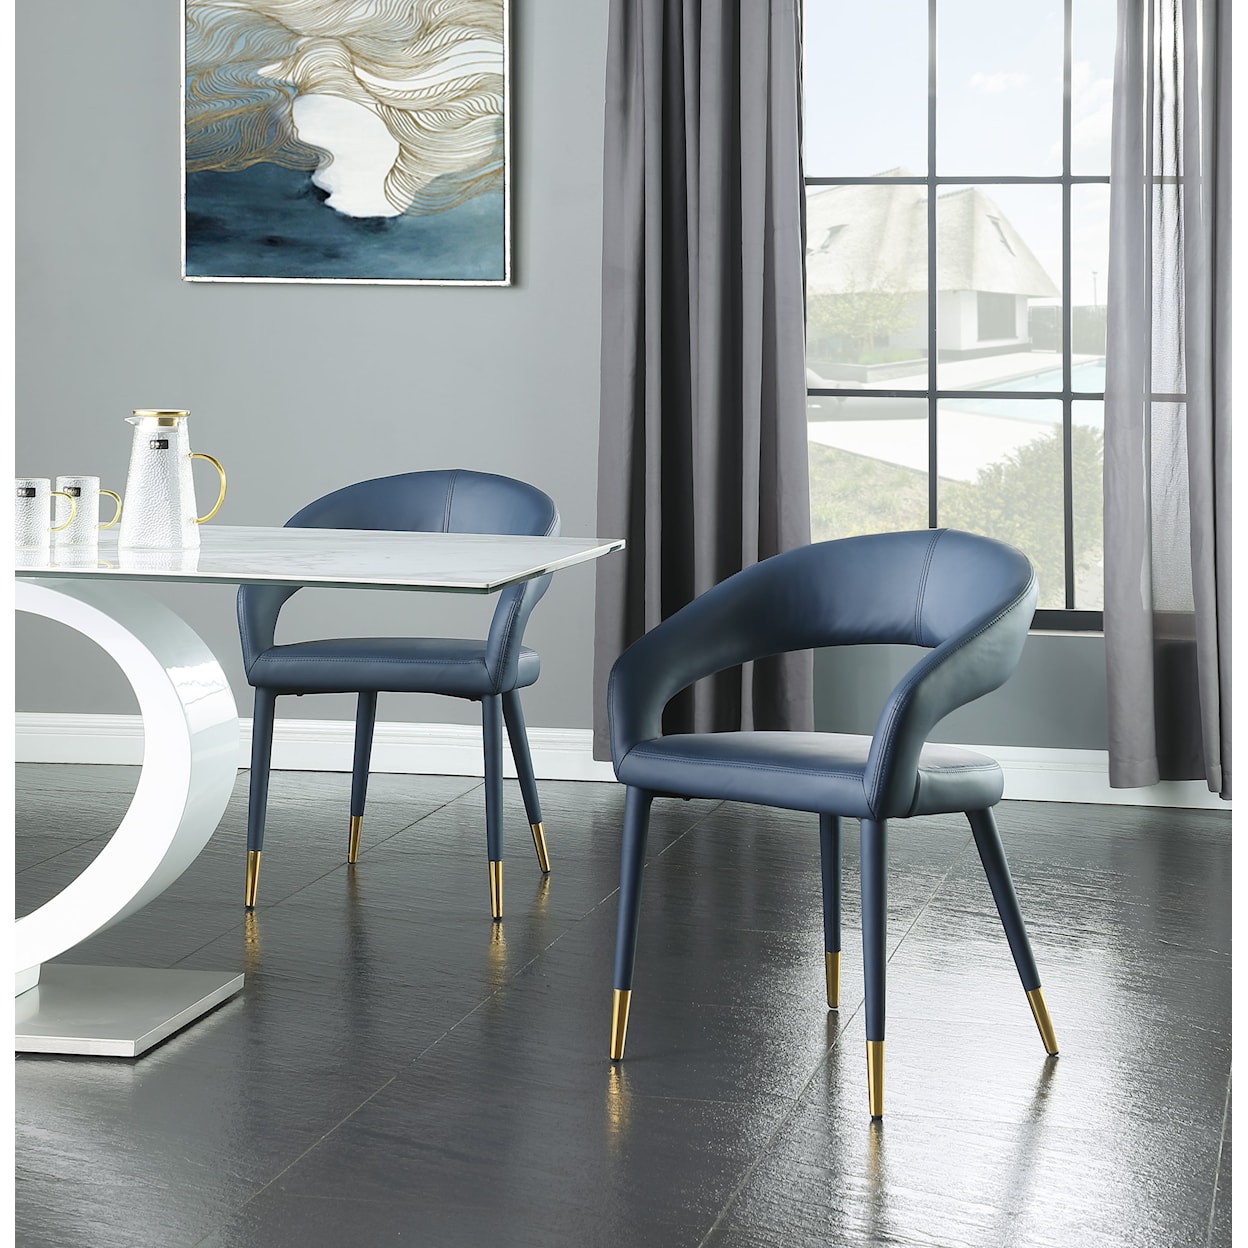 Meridian Furniture Destiny Upholstered Navy Faux Leather Dining Chair